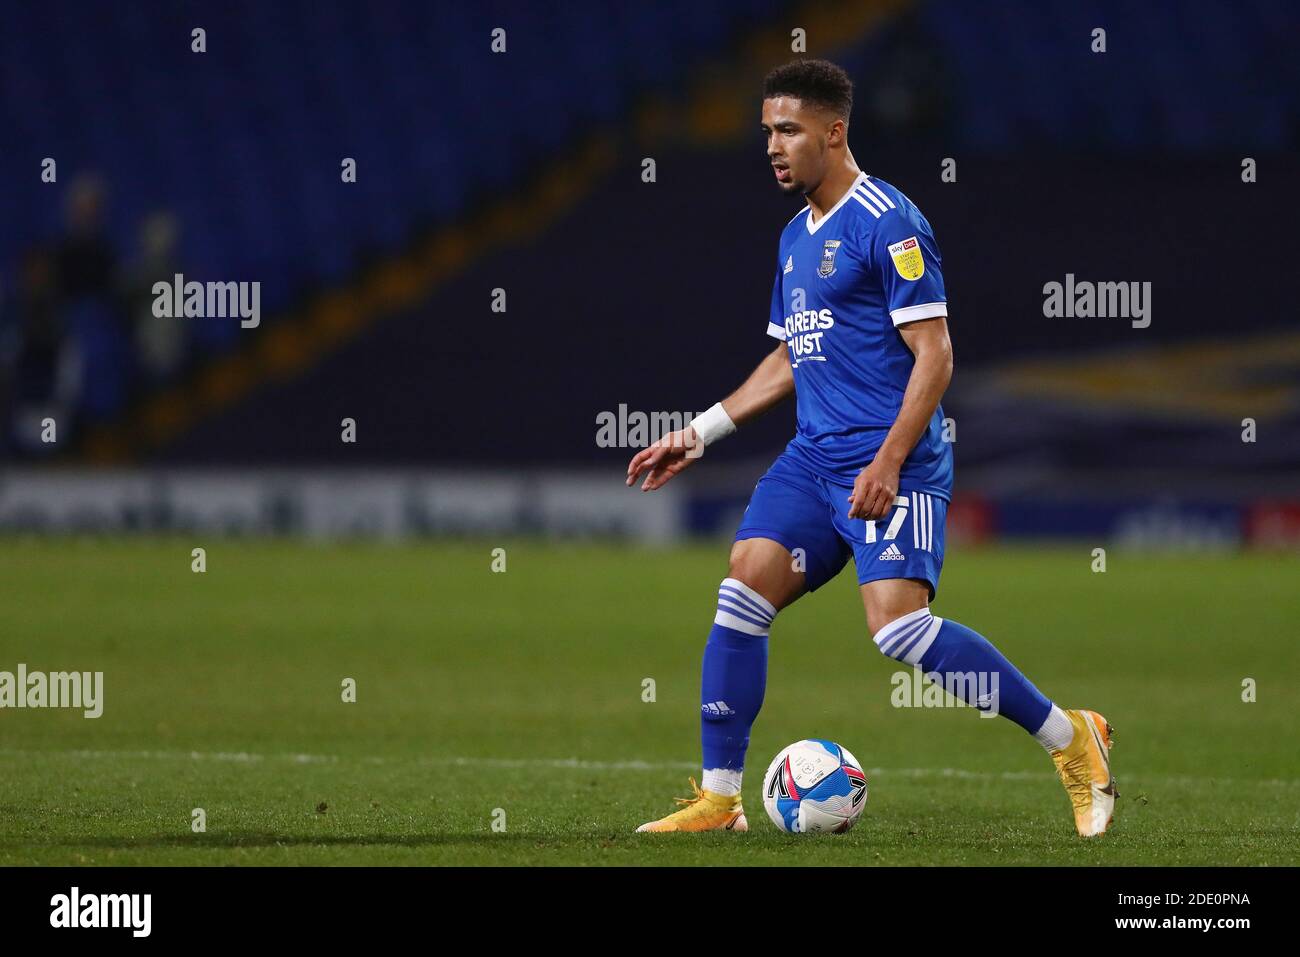 Keanan Bennetts of Ipswich Town - Ipswich Town v Hull City, Sky Bet League One, Portman Road, Ipswich, UK - 24th November 2020  Editorial Use Only - DataCo restrictions apply Stock Photo